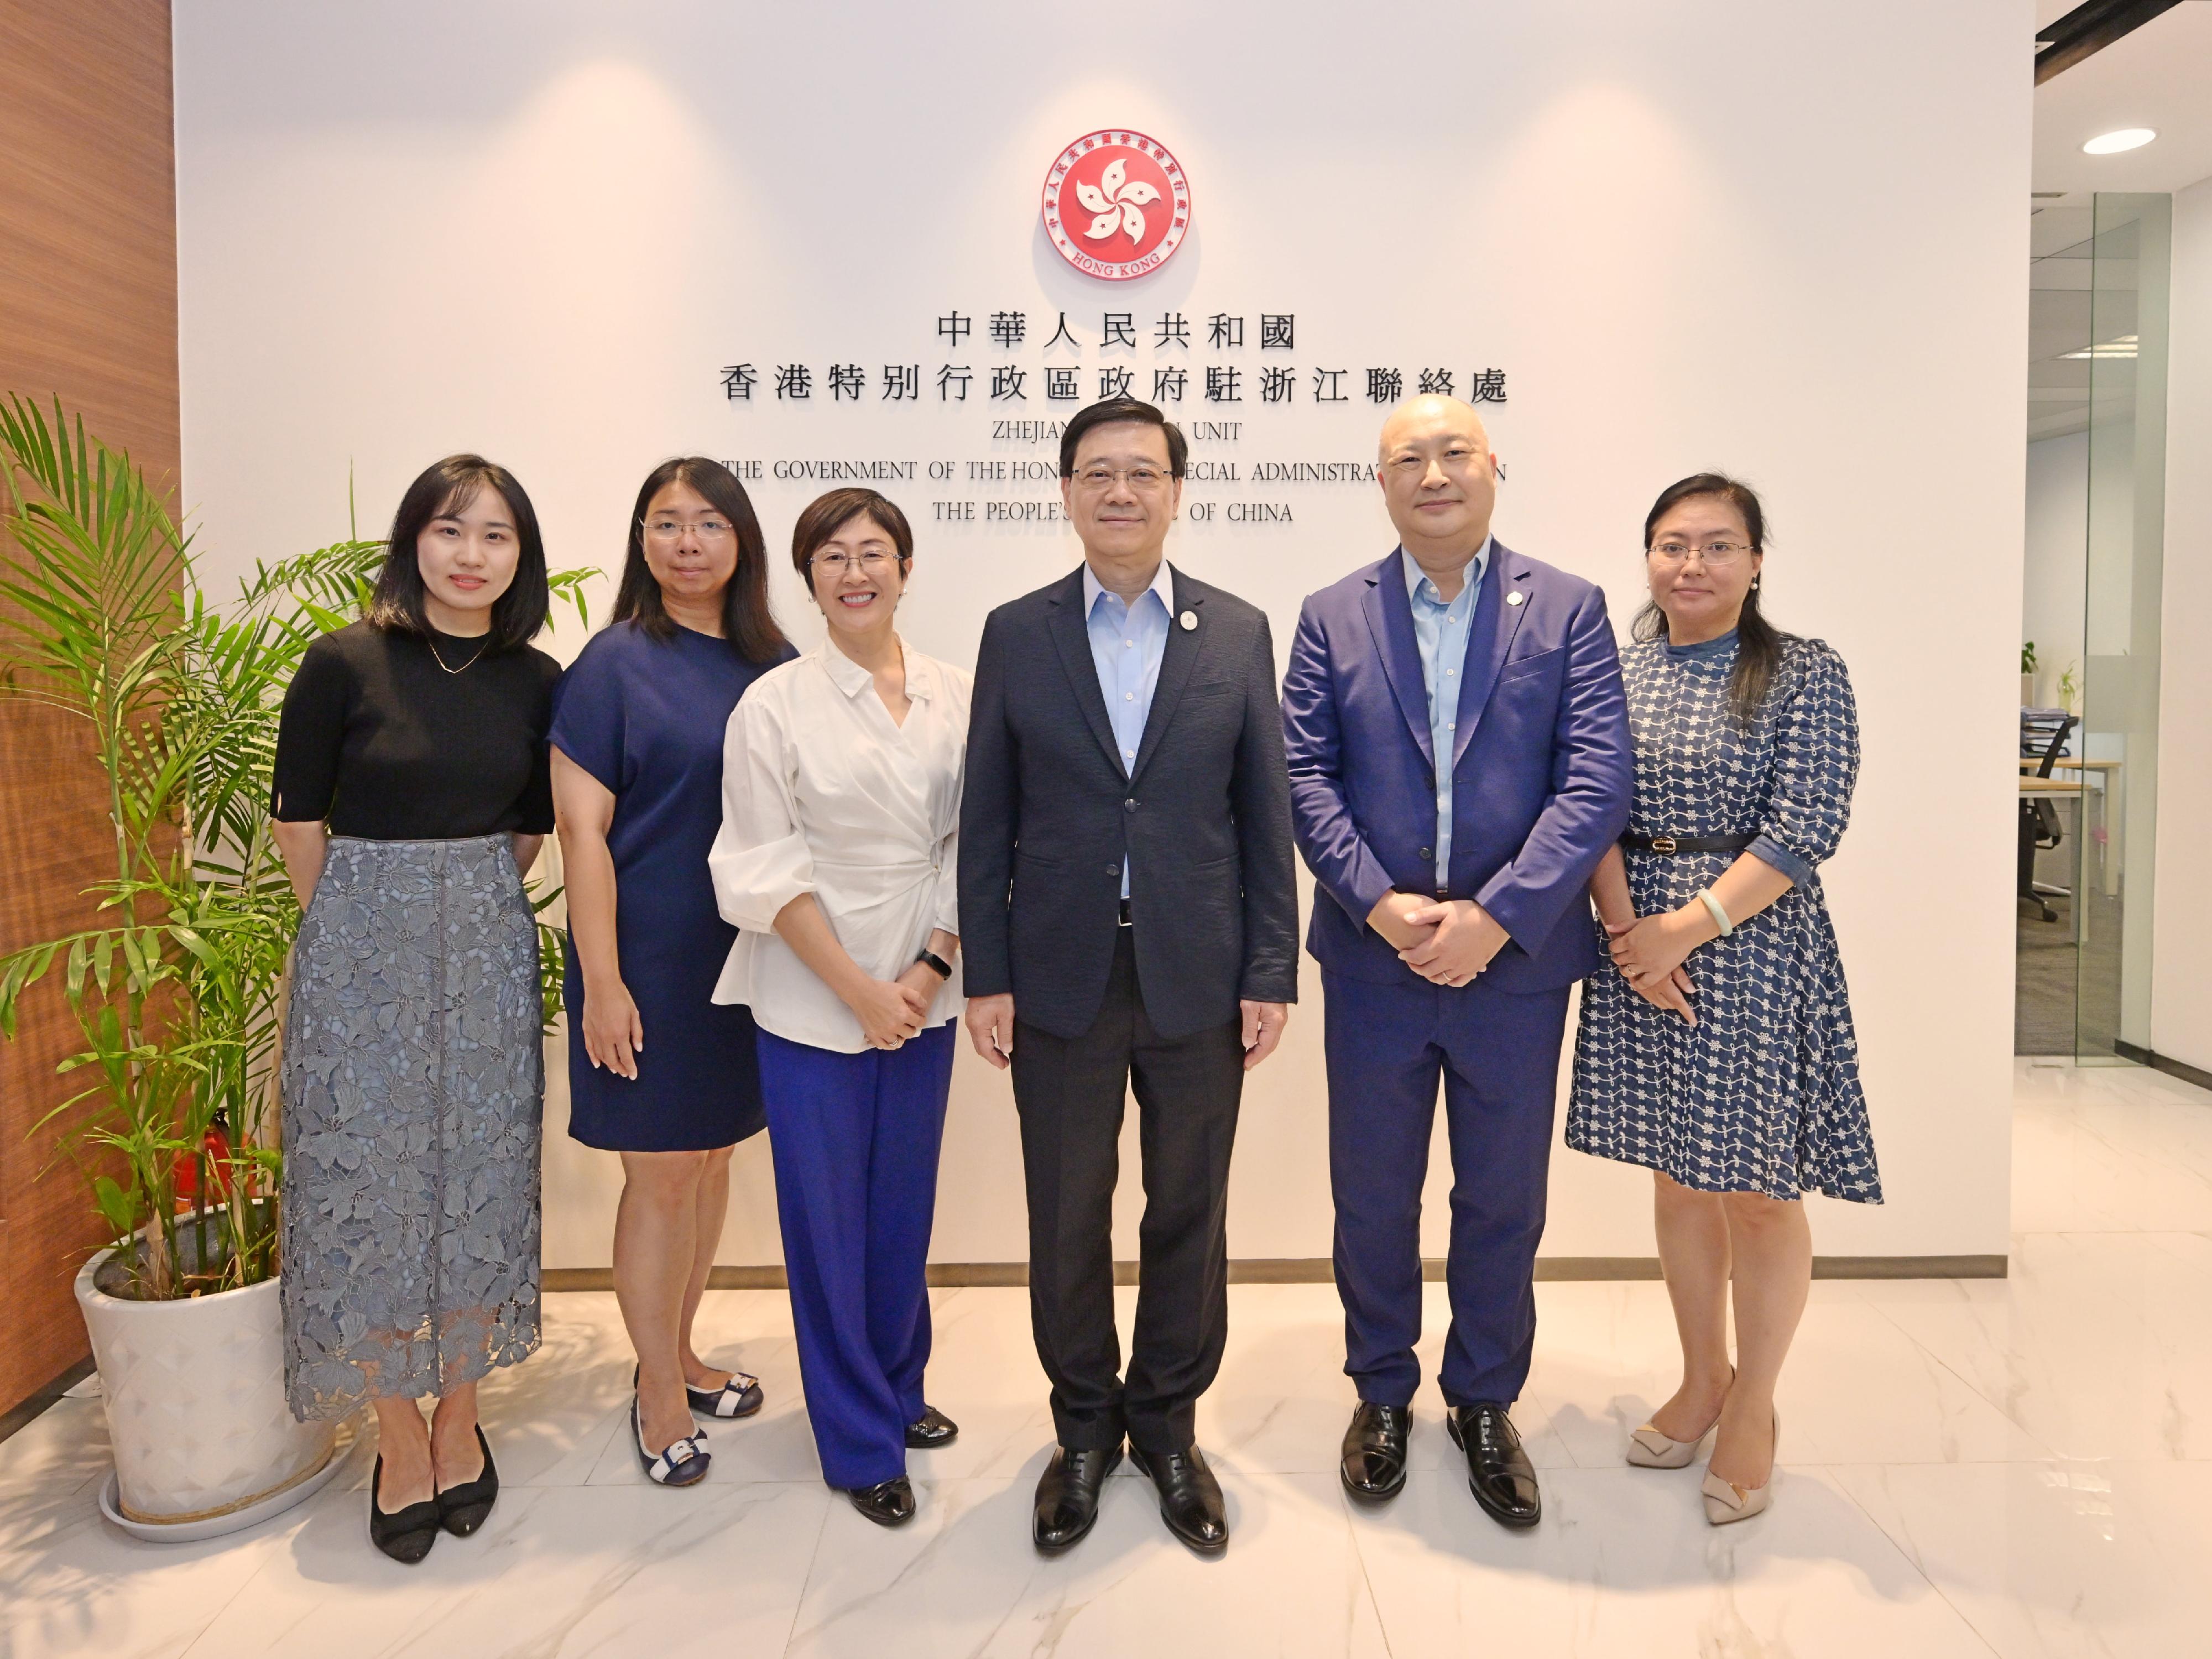 The Chief Executive, Mr John Lee, led a Hong Kong Special Administrative Region (HKSAR) Government delegation to Hangzhou and continued his visit programme today (September 24). Photo shows Mr Lee (third right); the Director of the Hong Kong Economic and Trade Office in Shanghai, Mrs Laura Aron (third left); the Director of the Zhejiang Liaison Unit (ZJLU) of the HKSAR Government, Mr Terence Lau (second right), and staff at the ZJLU.